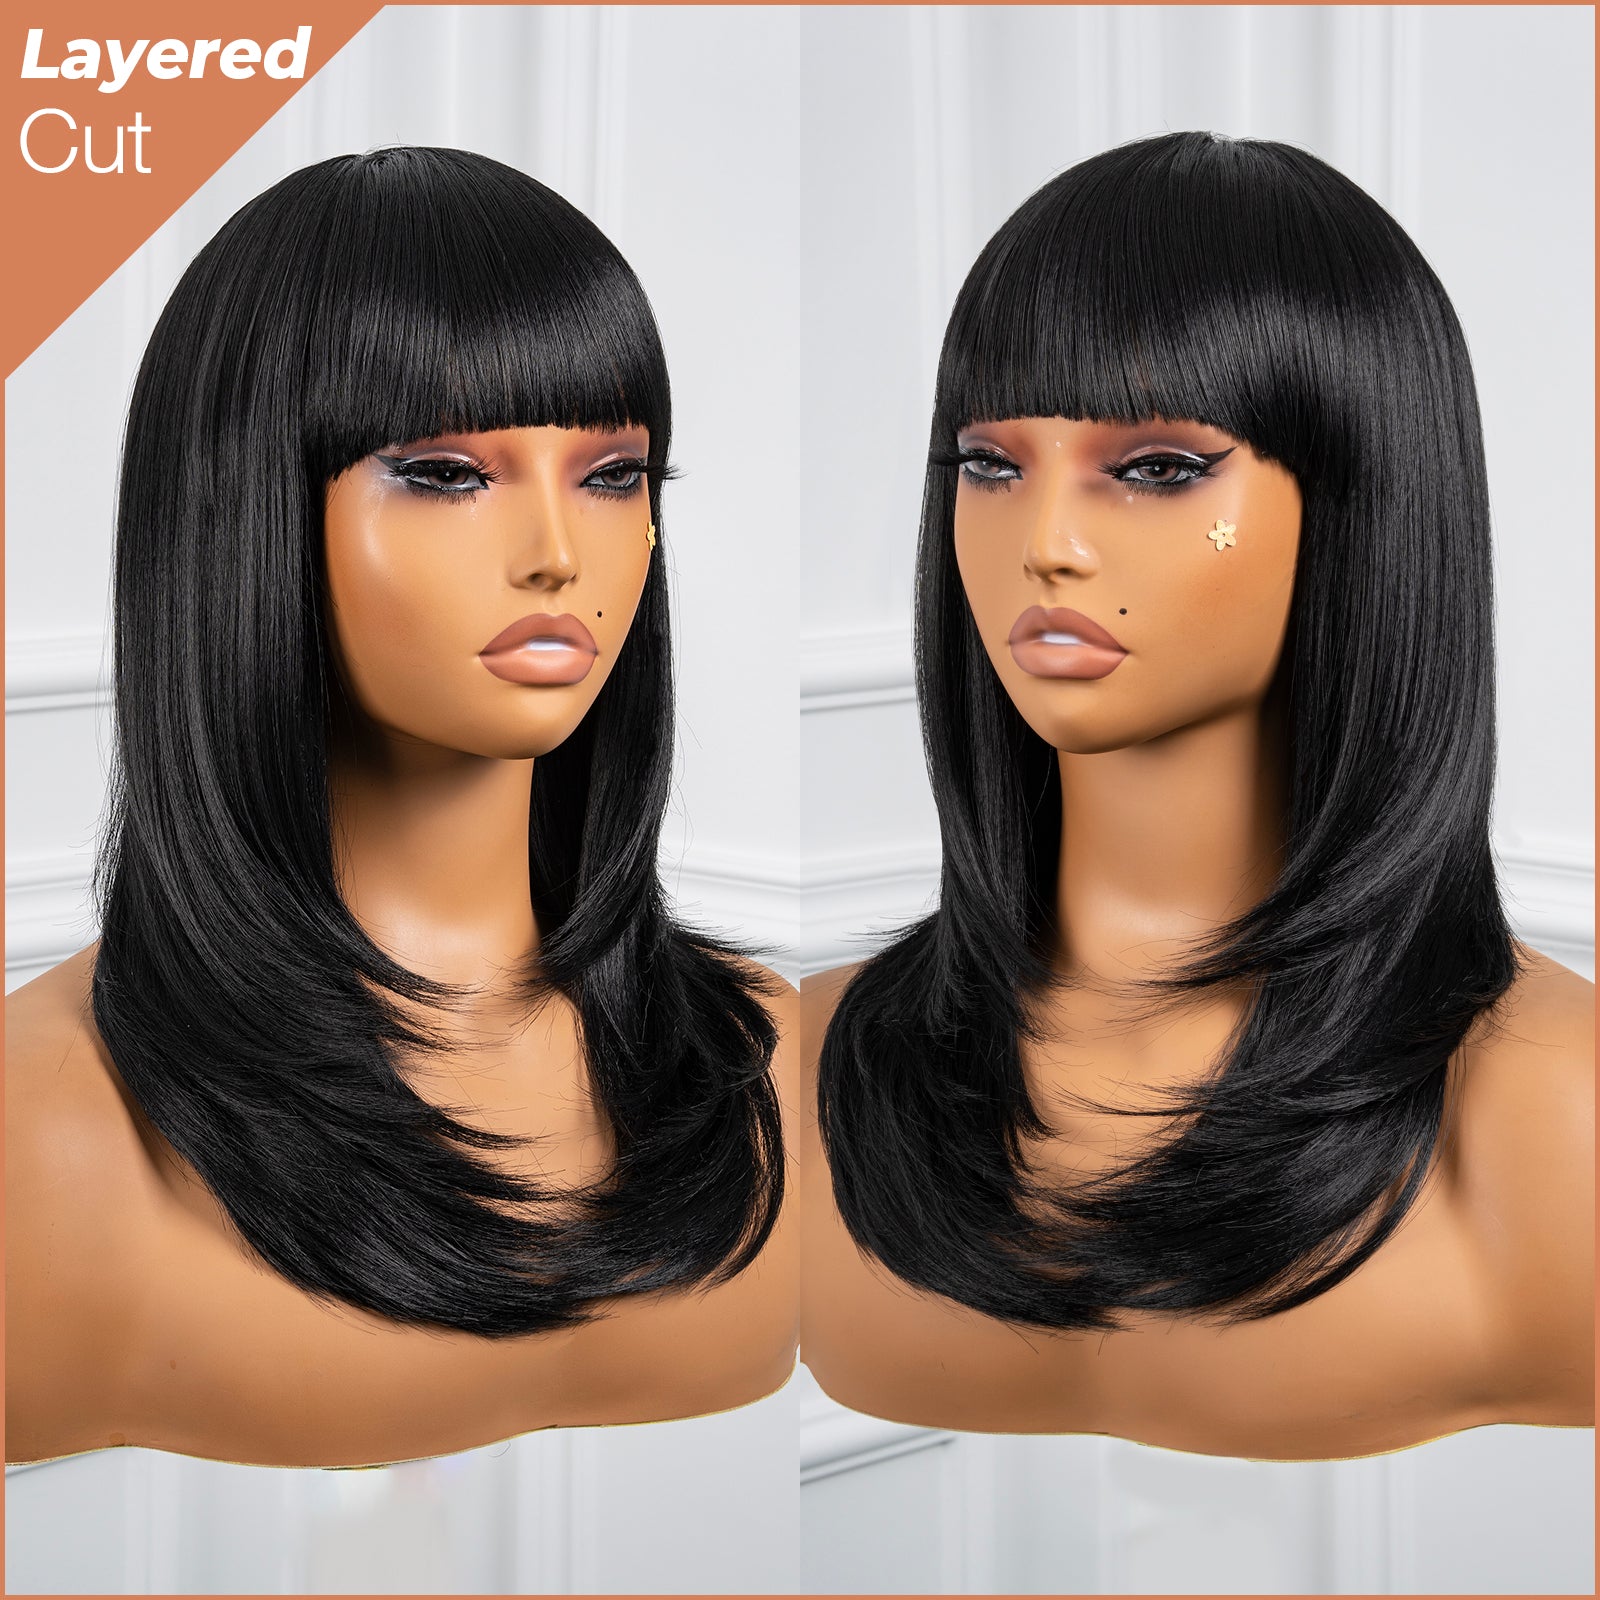 Toyotress  Shoulder-Length Layered Wigs With Bangs -10 Inch Natural Black Mid-Length Wavy Wigs For Black Women, Heat Resistant Synthetic Hair Replacement Wigs (BZ-10)